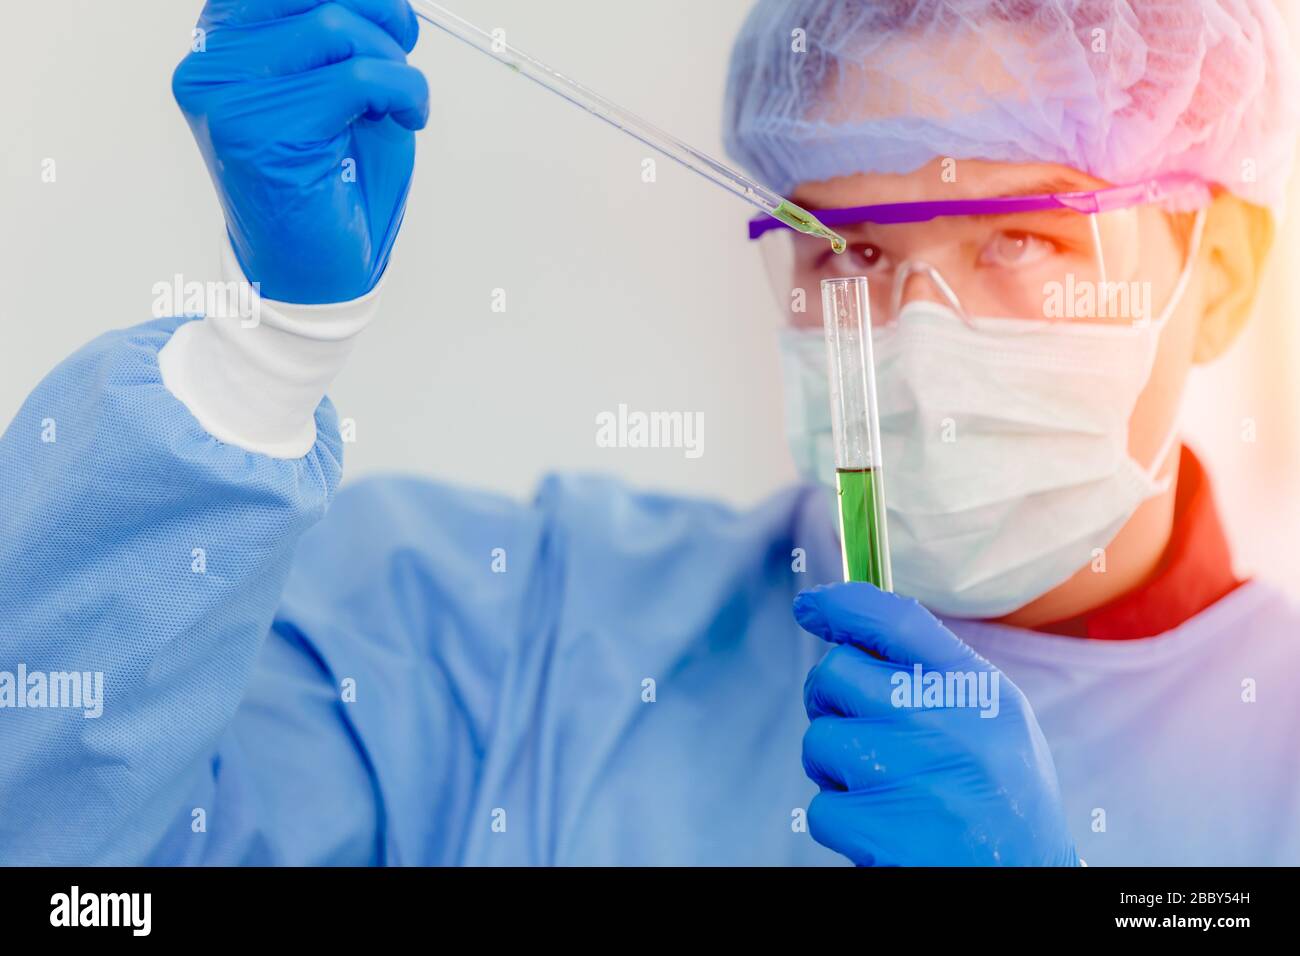 Scientist Doctor working in lab with danger virus medical test research antibiotic medicine dressing biohazard protective blue uniform Stock Photo